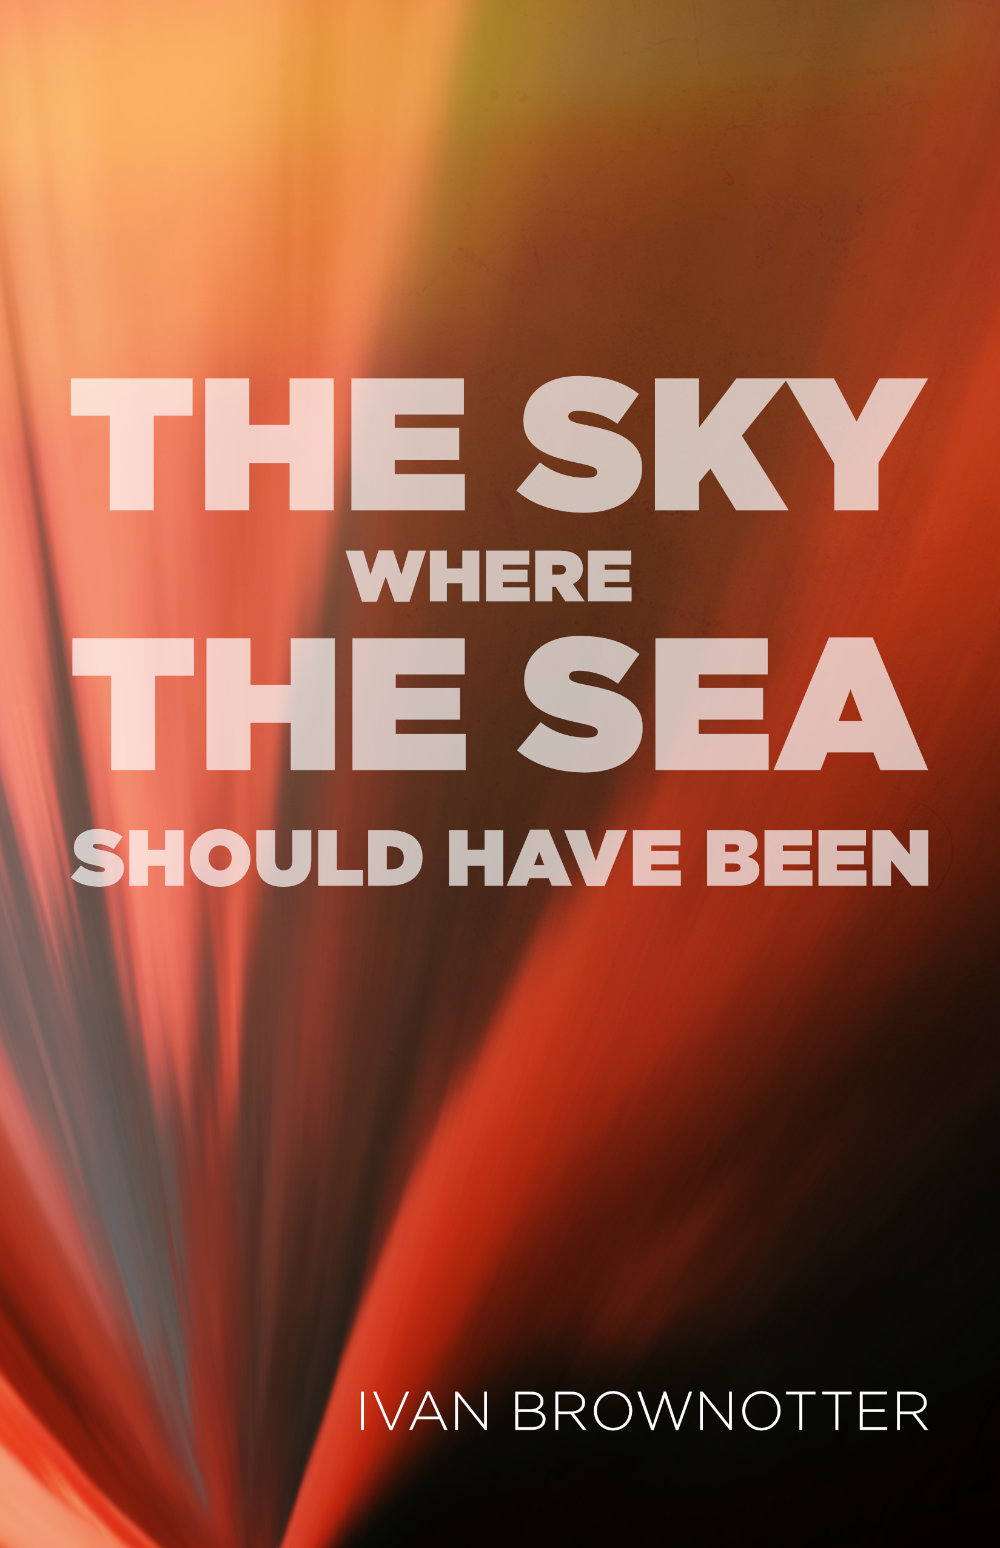 The Sky Where the Sea Should Have Been